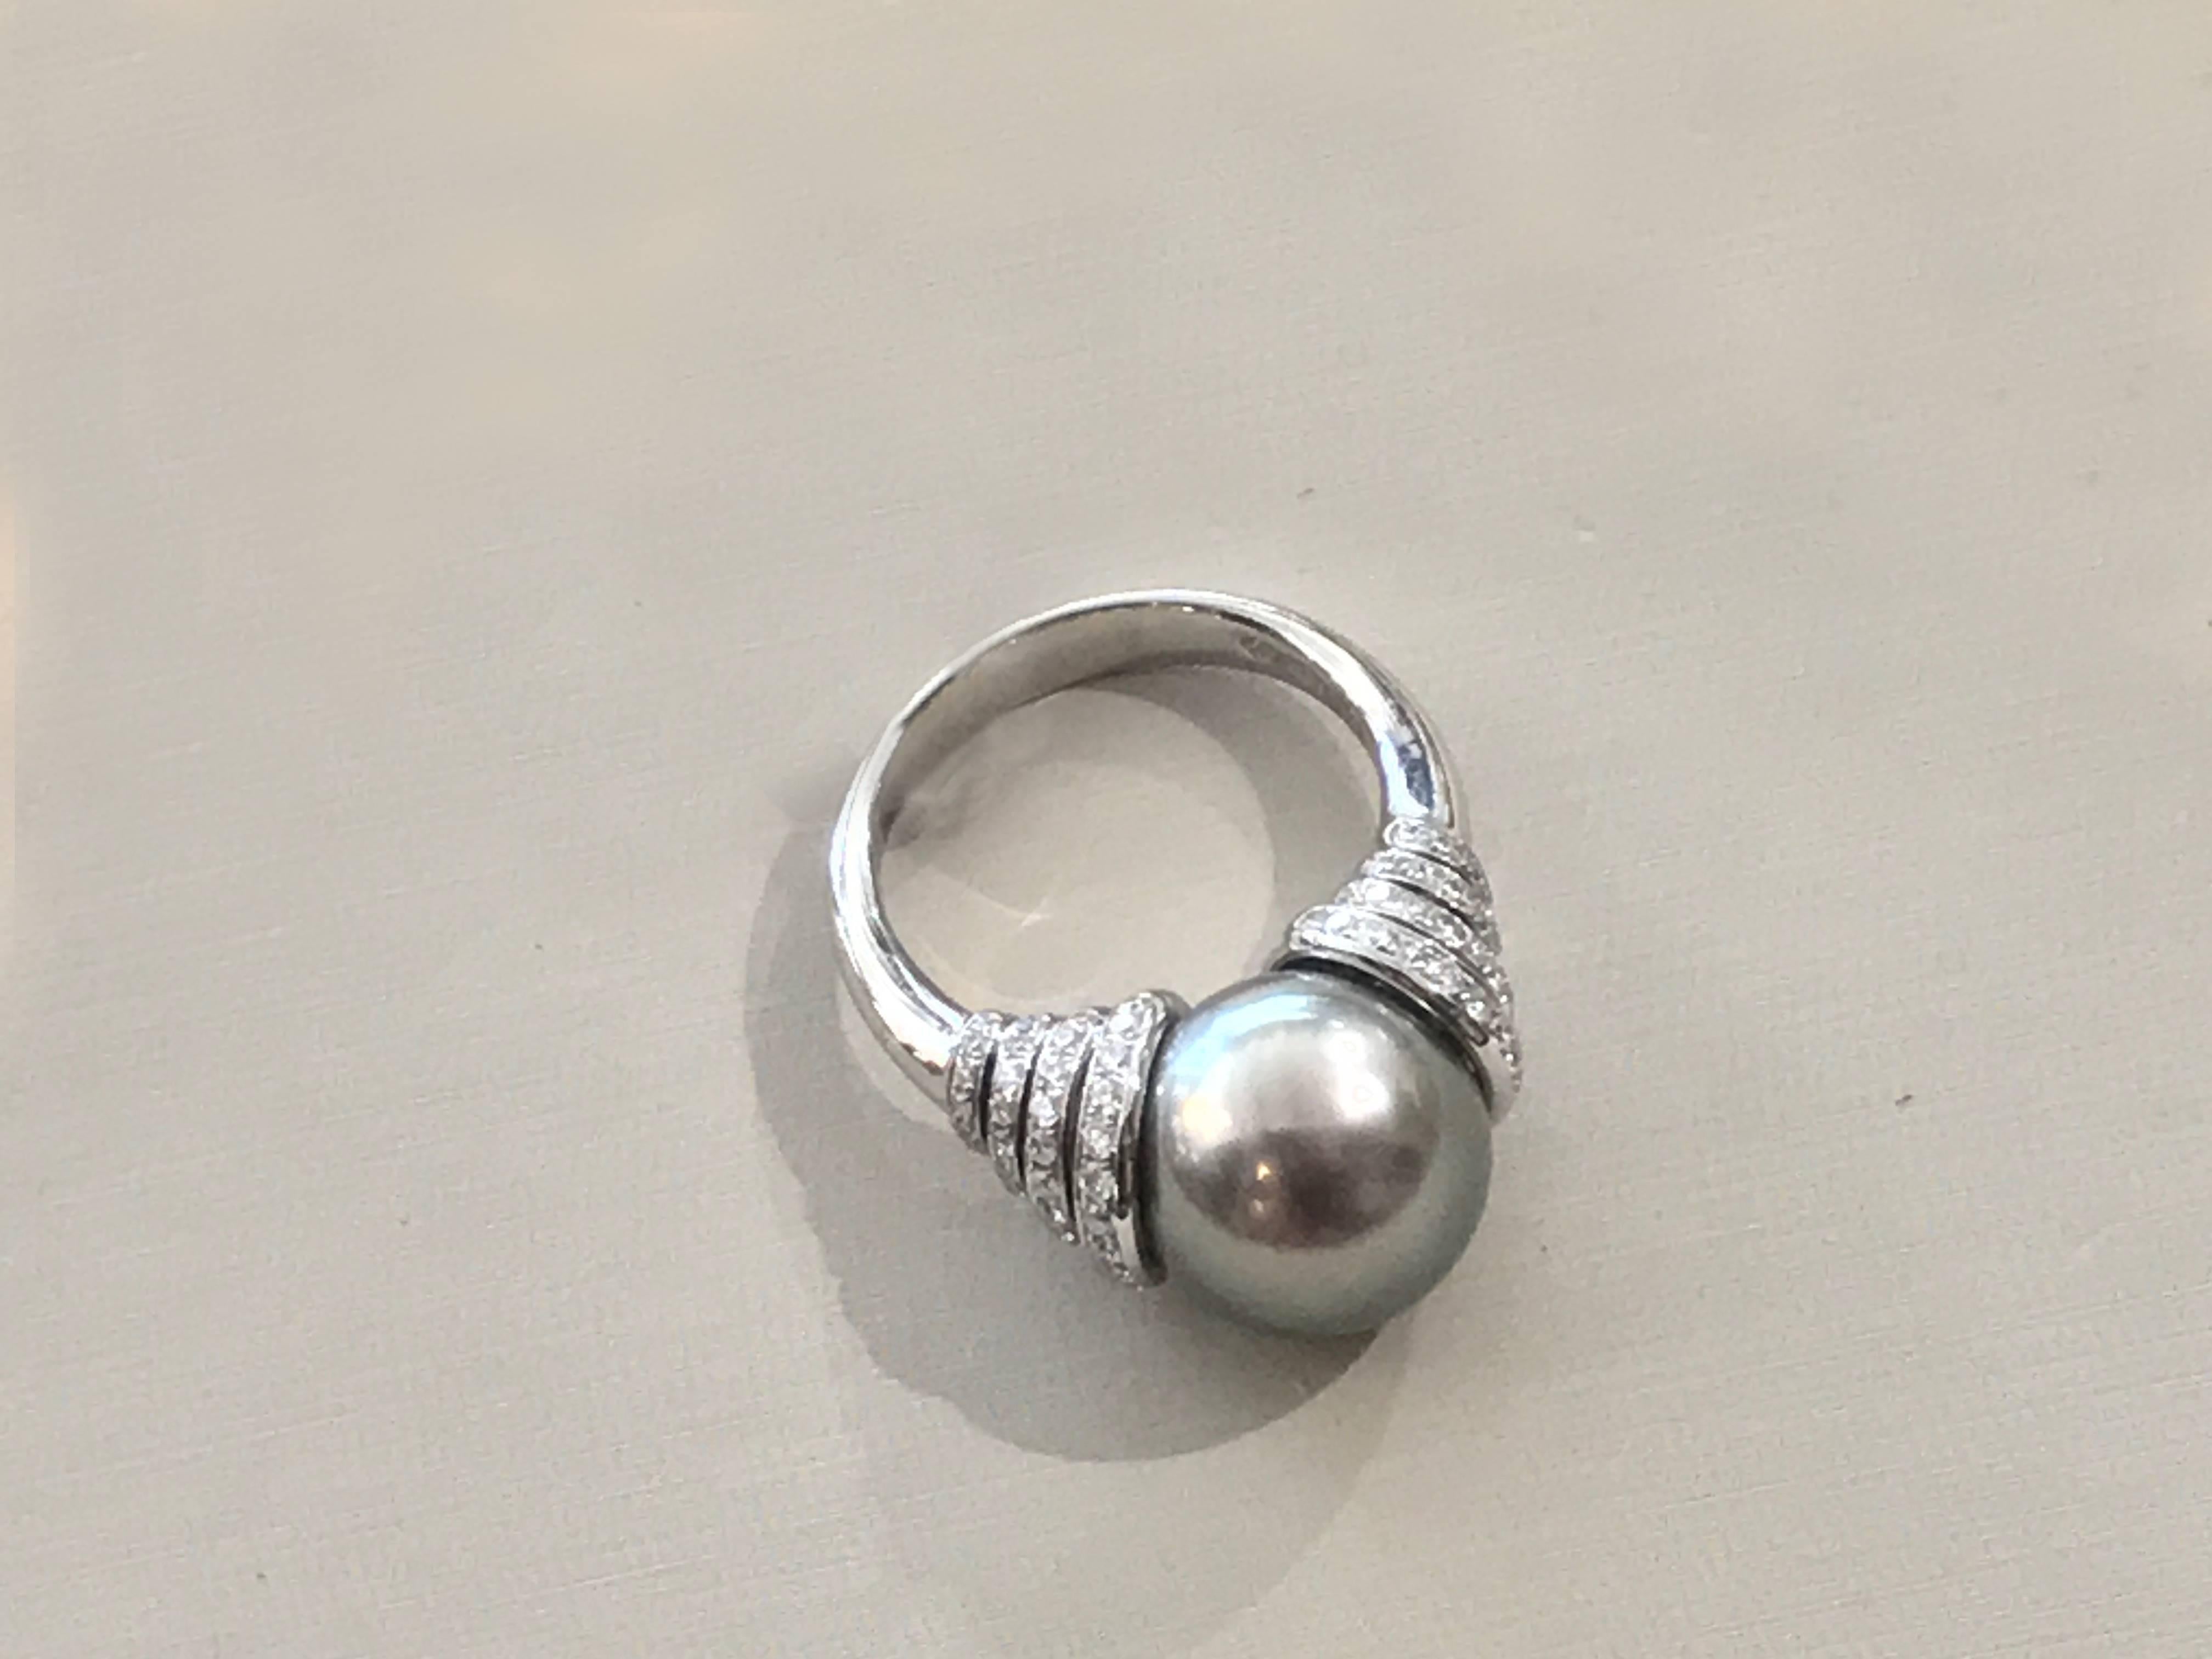 Cultured Pearl and Diamonds White Gold Ring
Cultured Pearl 12/13 millimeter
White Gold 18 Carat
Diamonds 0,70 Carat color G/vs